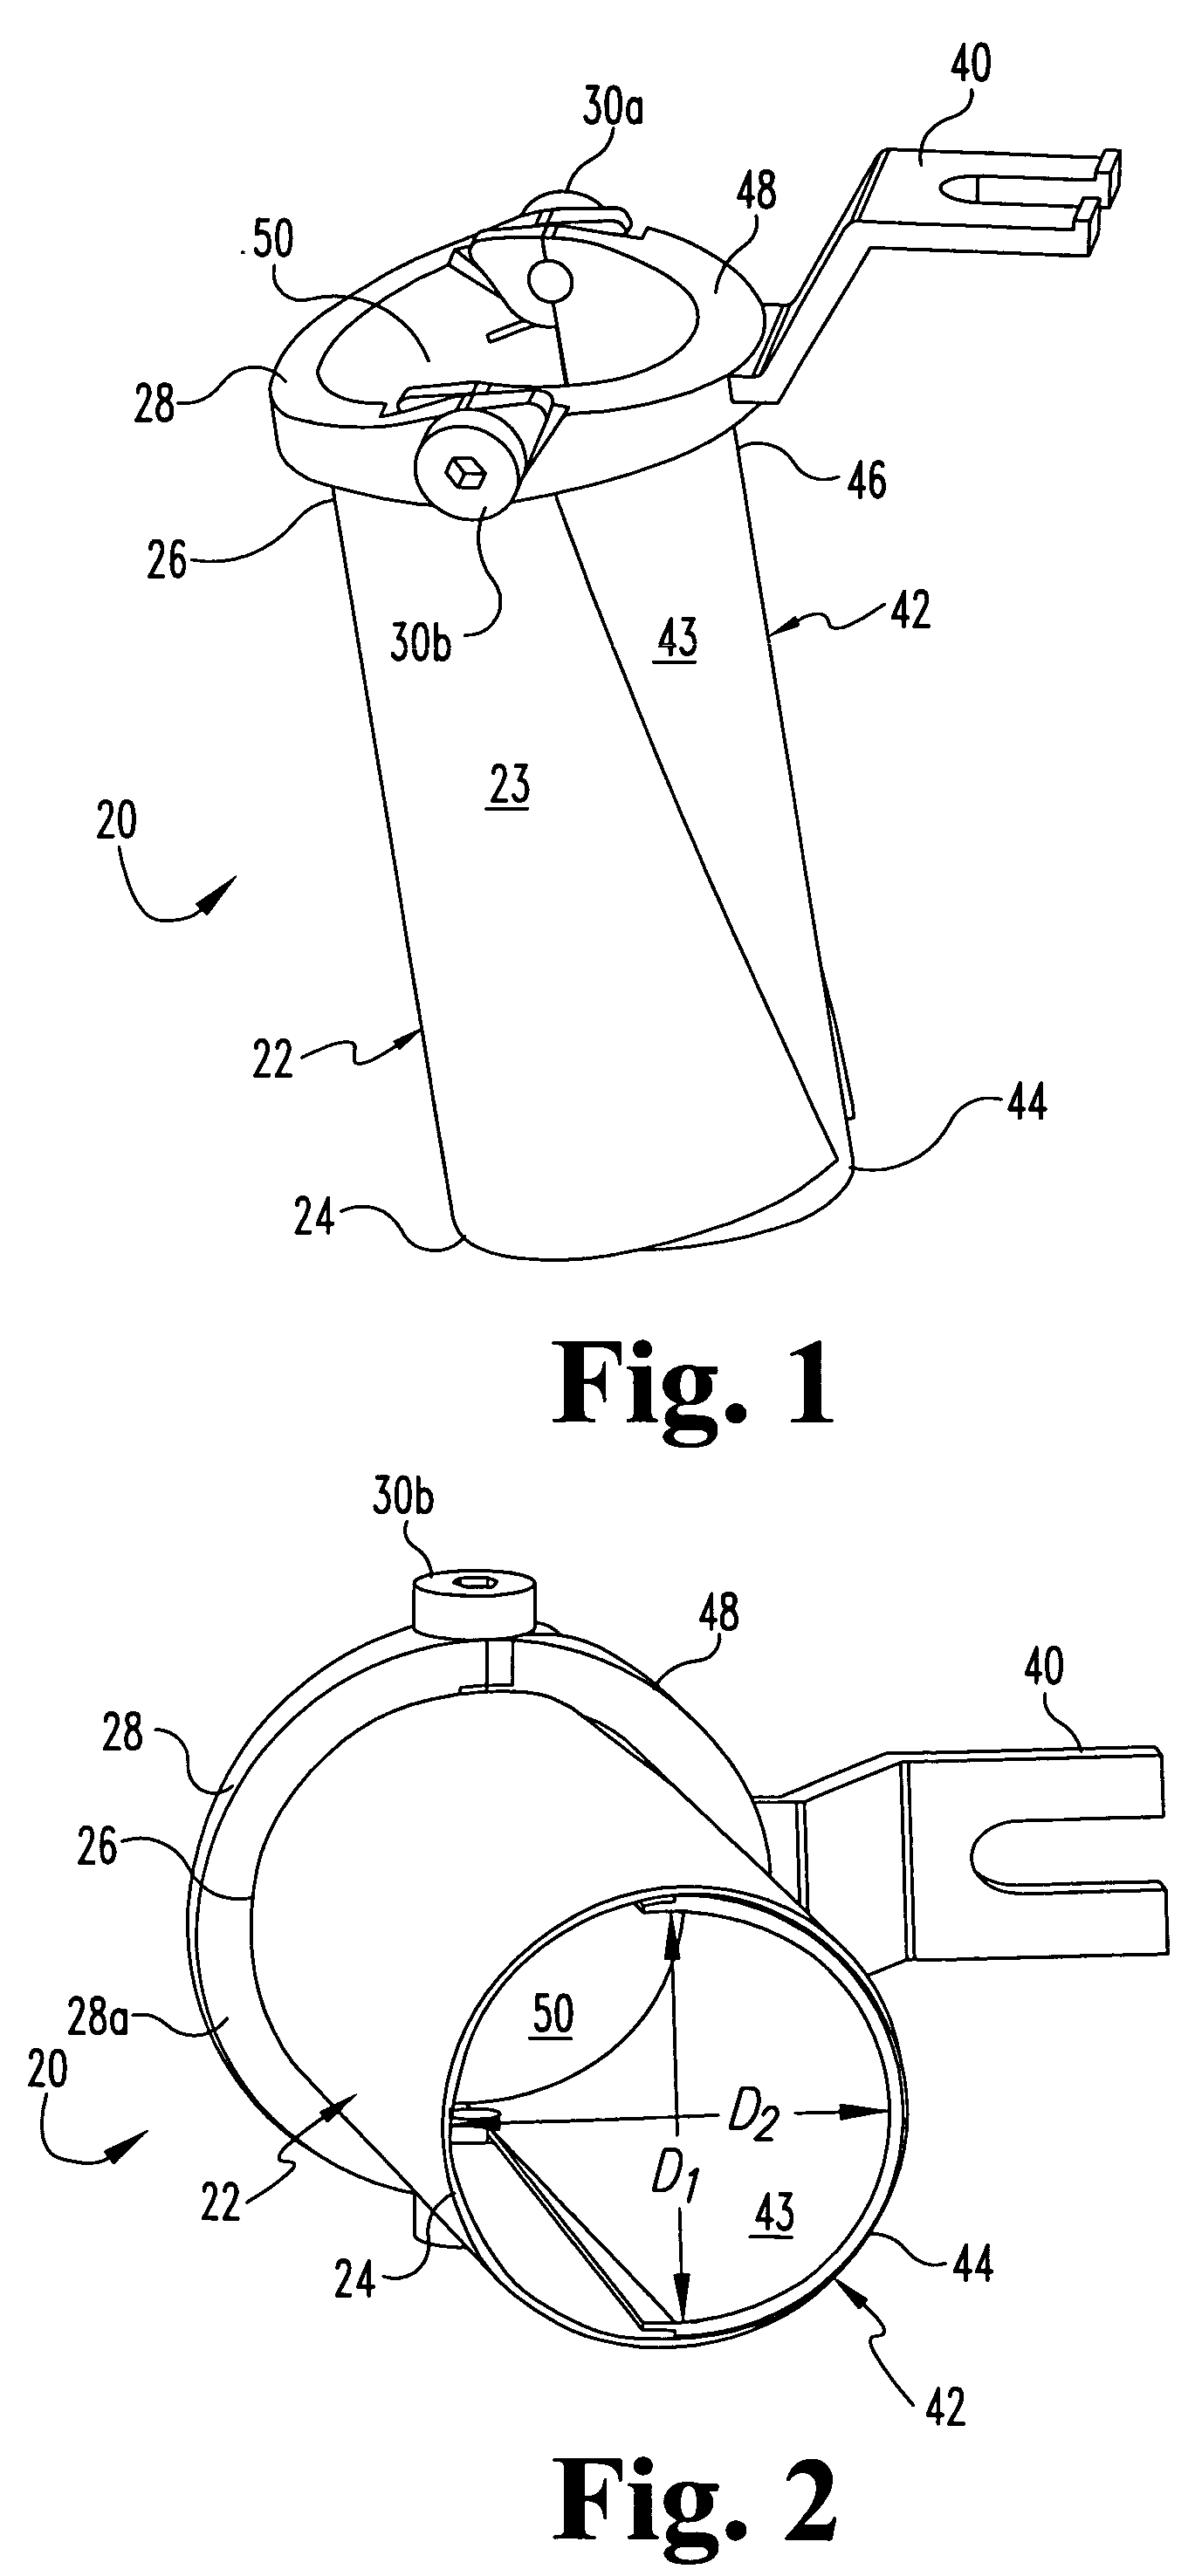 Devices and methods for percutaneous tissue retraction and surgery